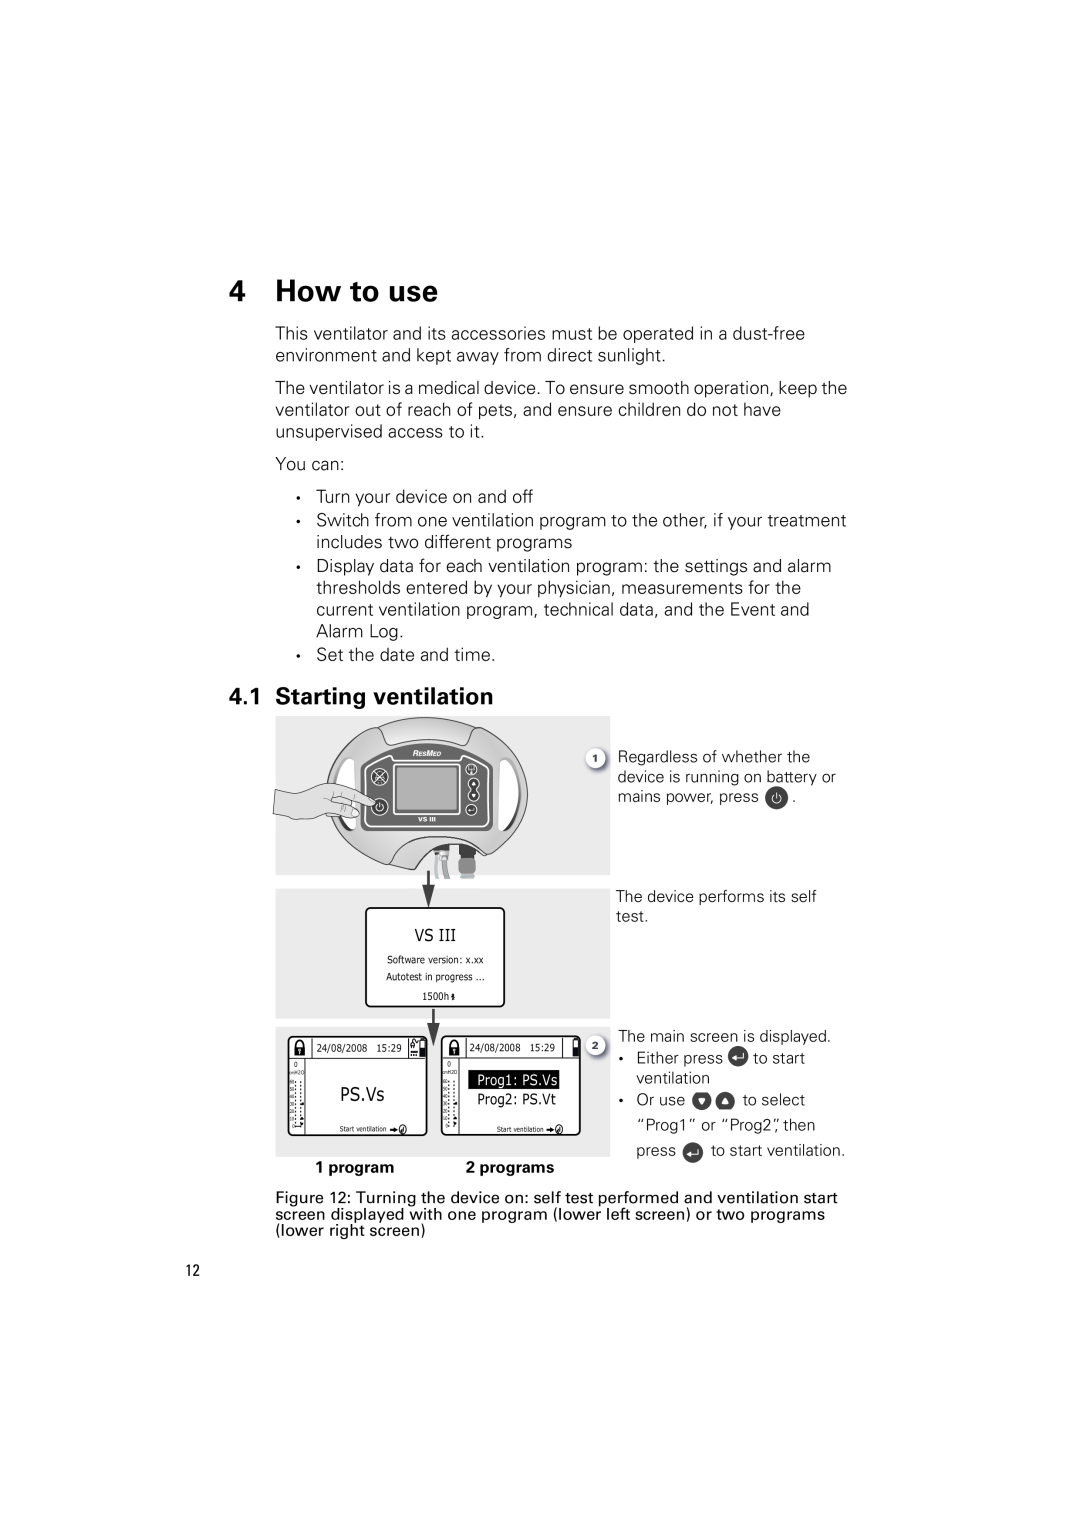 ResMed VS III user manual How to use, 4.1Starting ventilation 